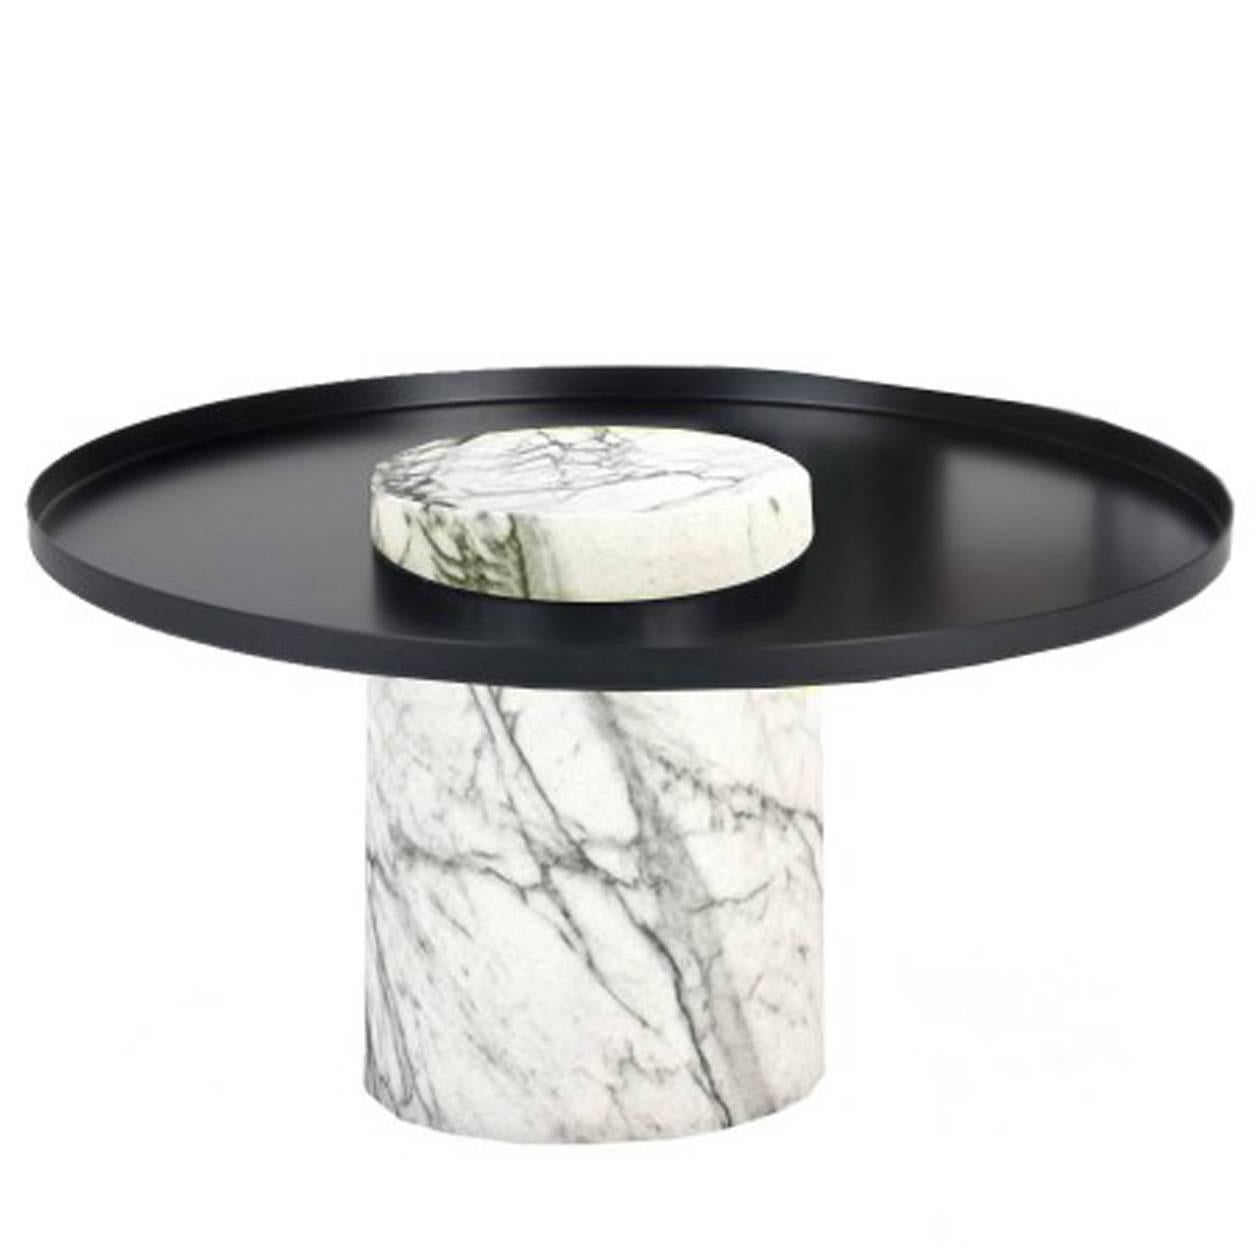 Low Salute Coffee Table, White Marble, Black Tray For Sale